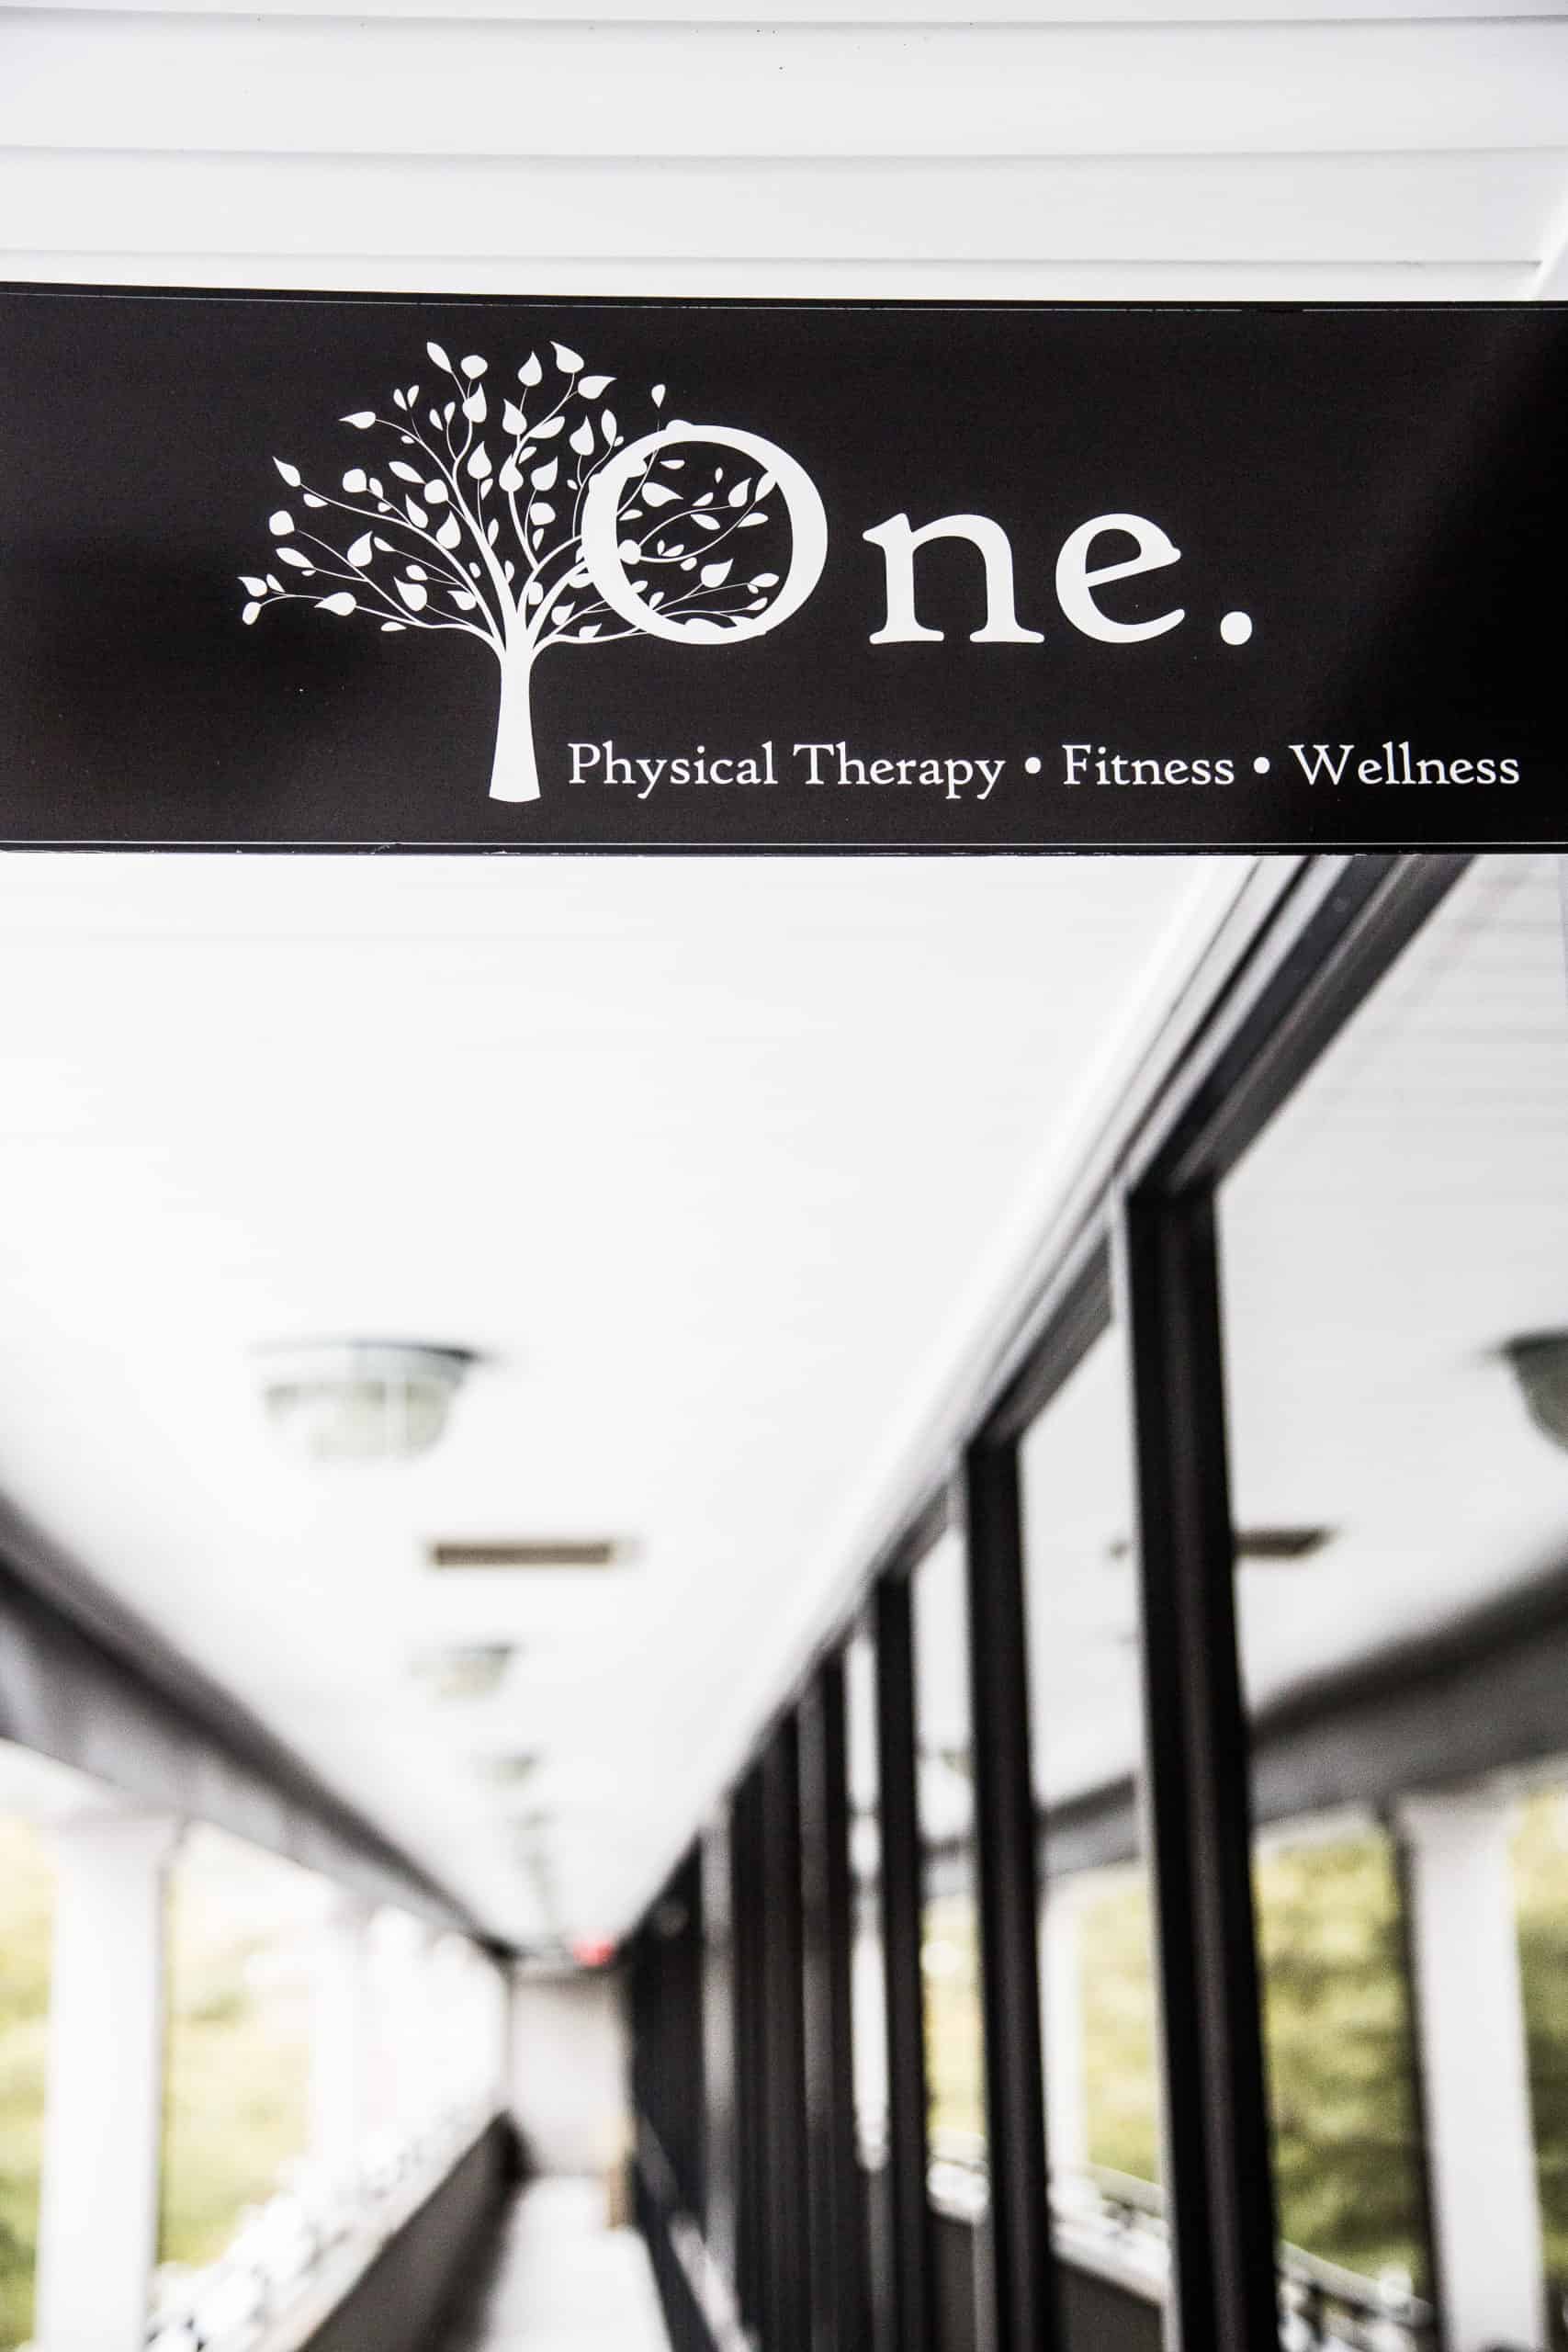 One Physical Therapy & Fitness logo signage.